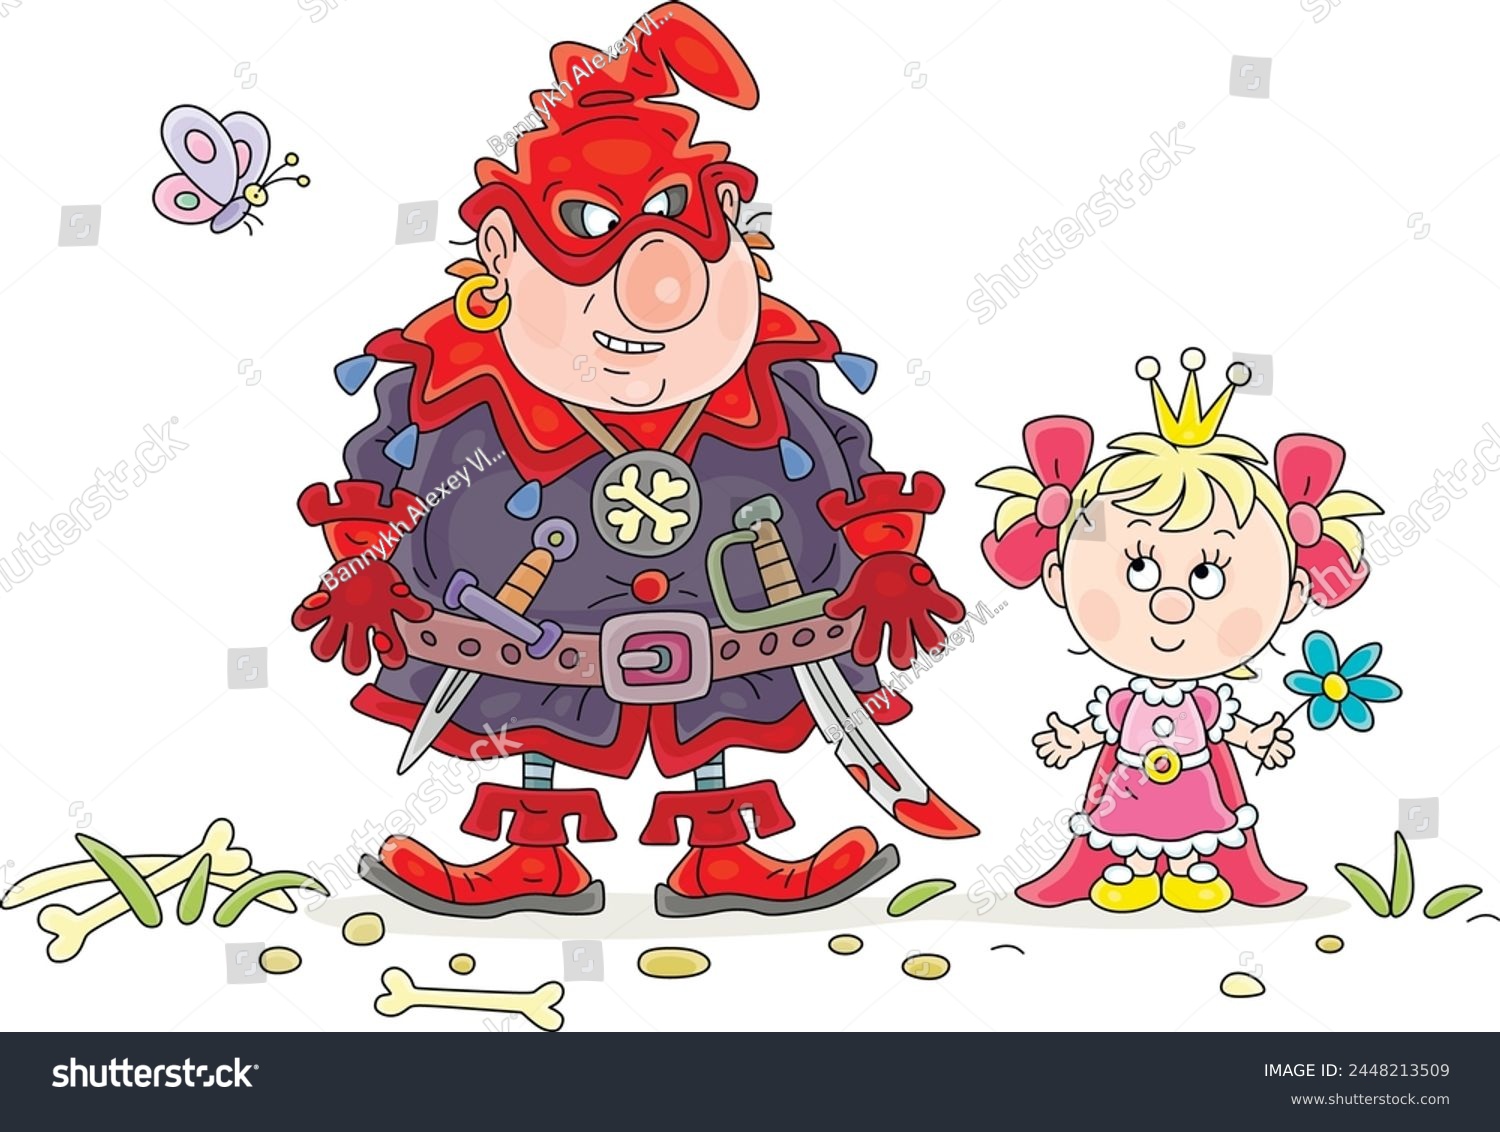 SVG of Little princess in a beautiful royal pink dress and a small royal gold crown talking to an angry cruel ogre on a summer lawn with a fluttering butterfly, vector cartoon illustration on white svg